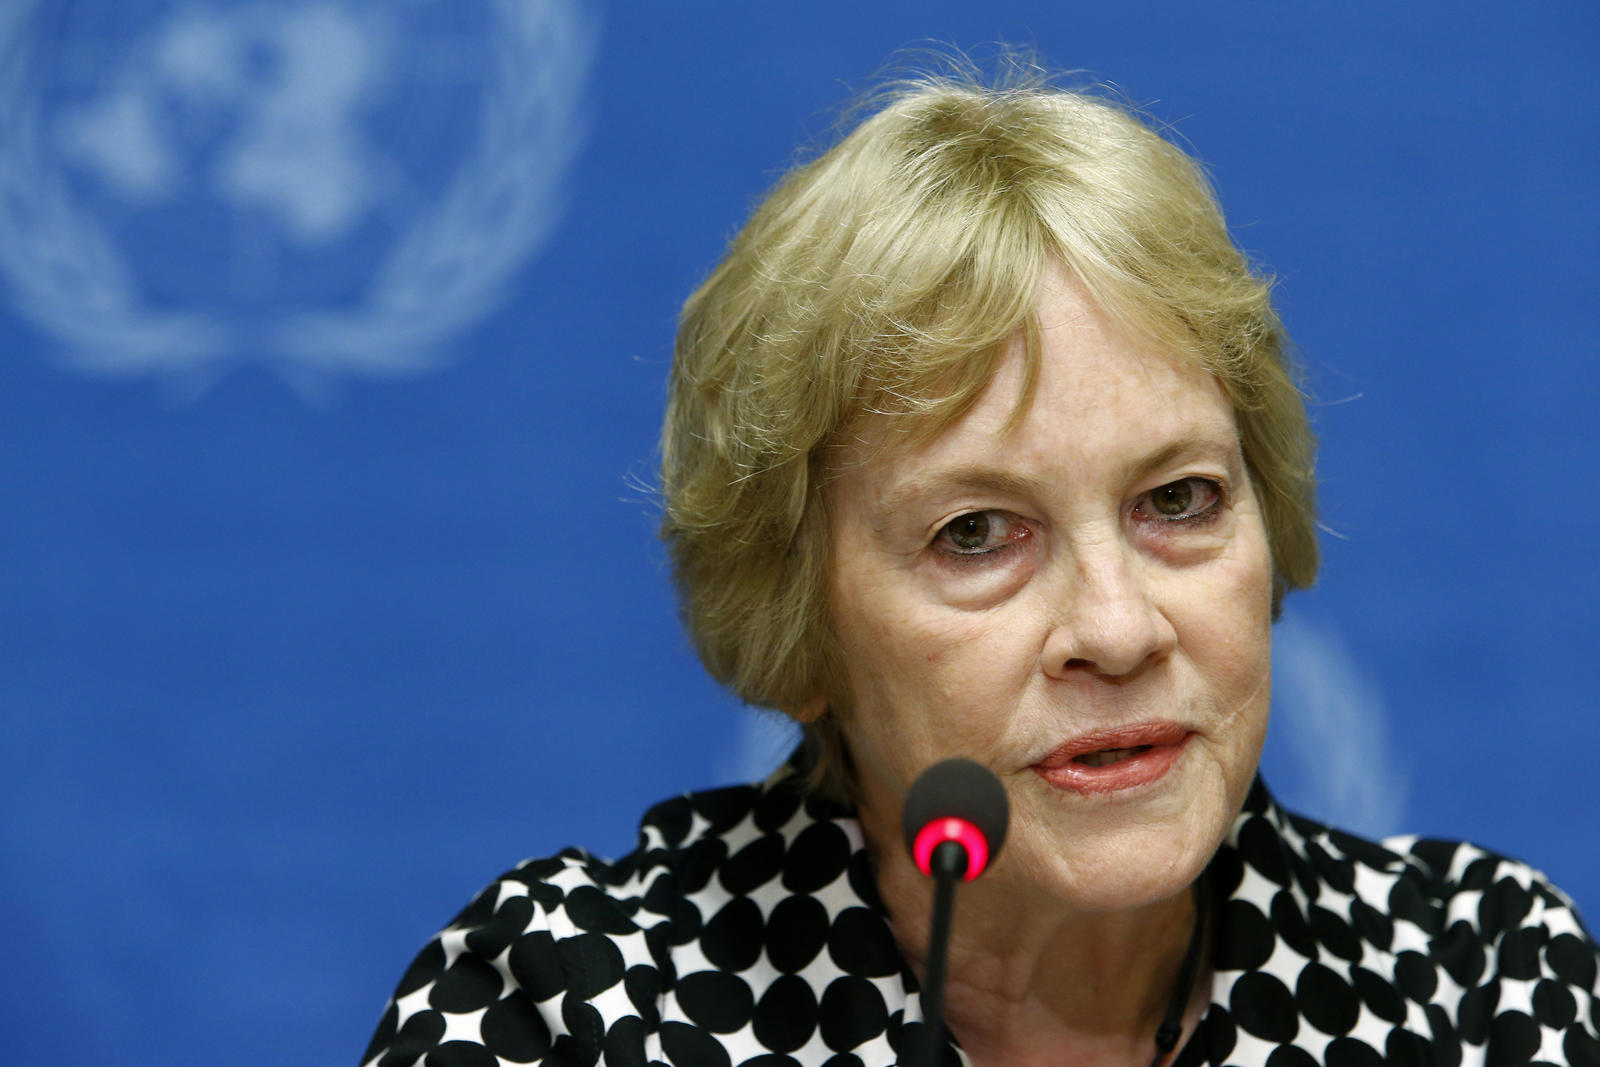 Karen Koning AbuZayd, a member of Independent International Commission of Inquiry on the Syrian Arab Republic, attends a news conference at the United Nations headquarters in Geneva